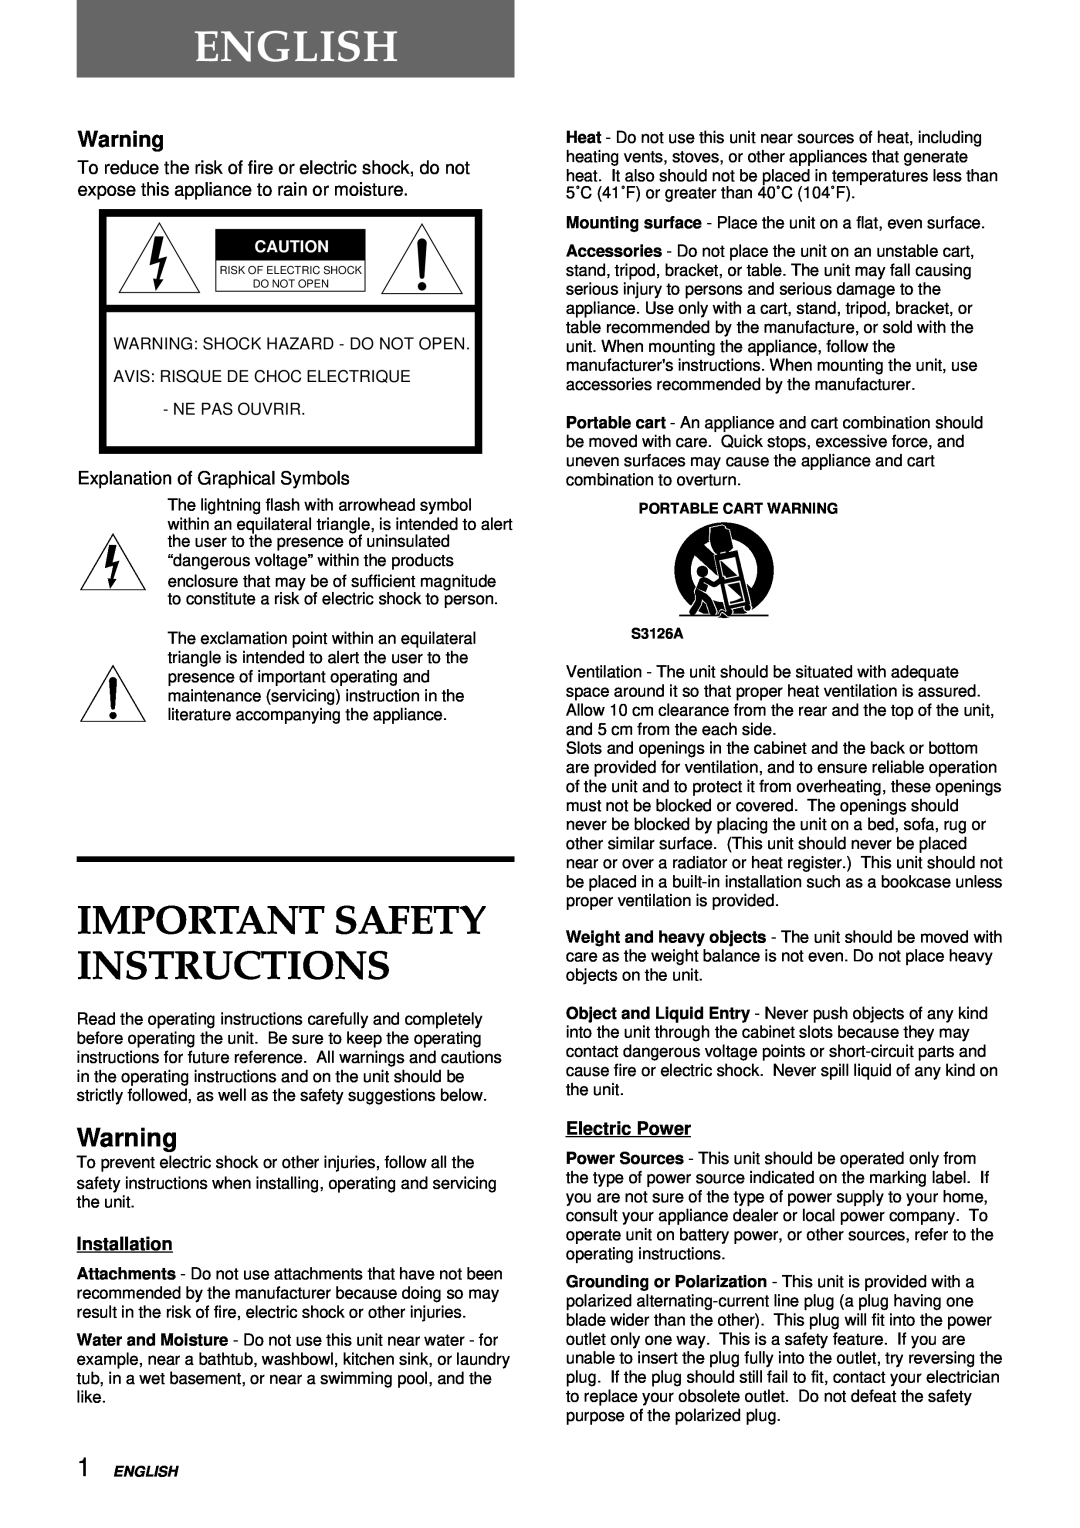 Aiwa VX-S137U manual English, Important Safety Instructions, Explanation of Graphical Symbols, Installation, Electric Power 